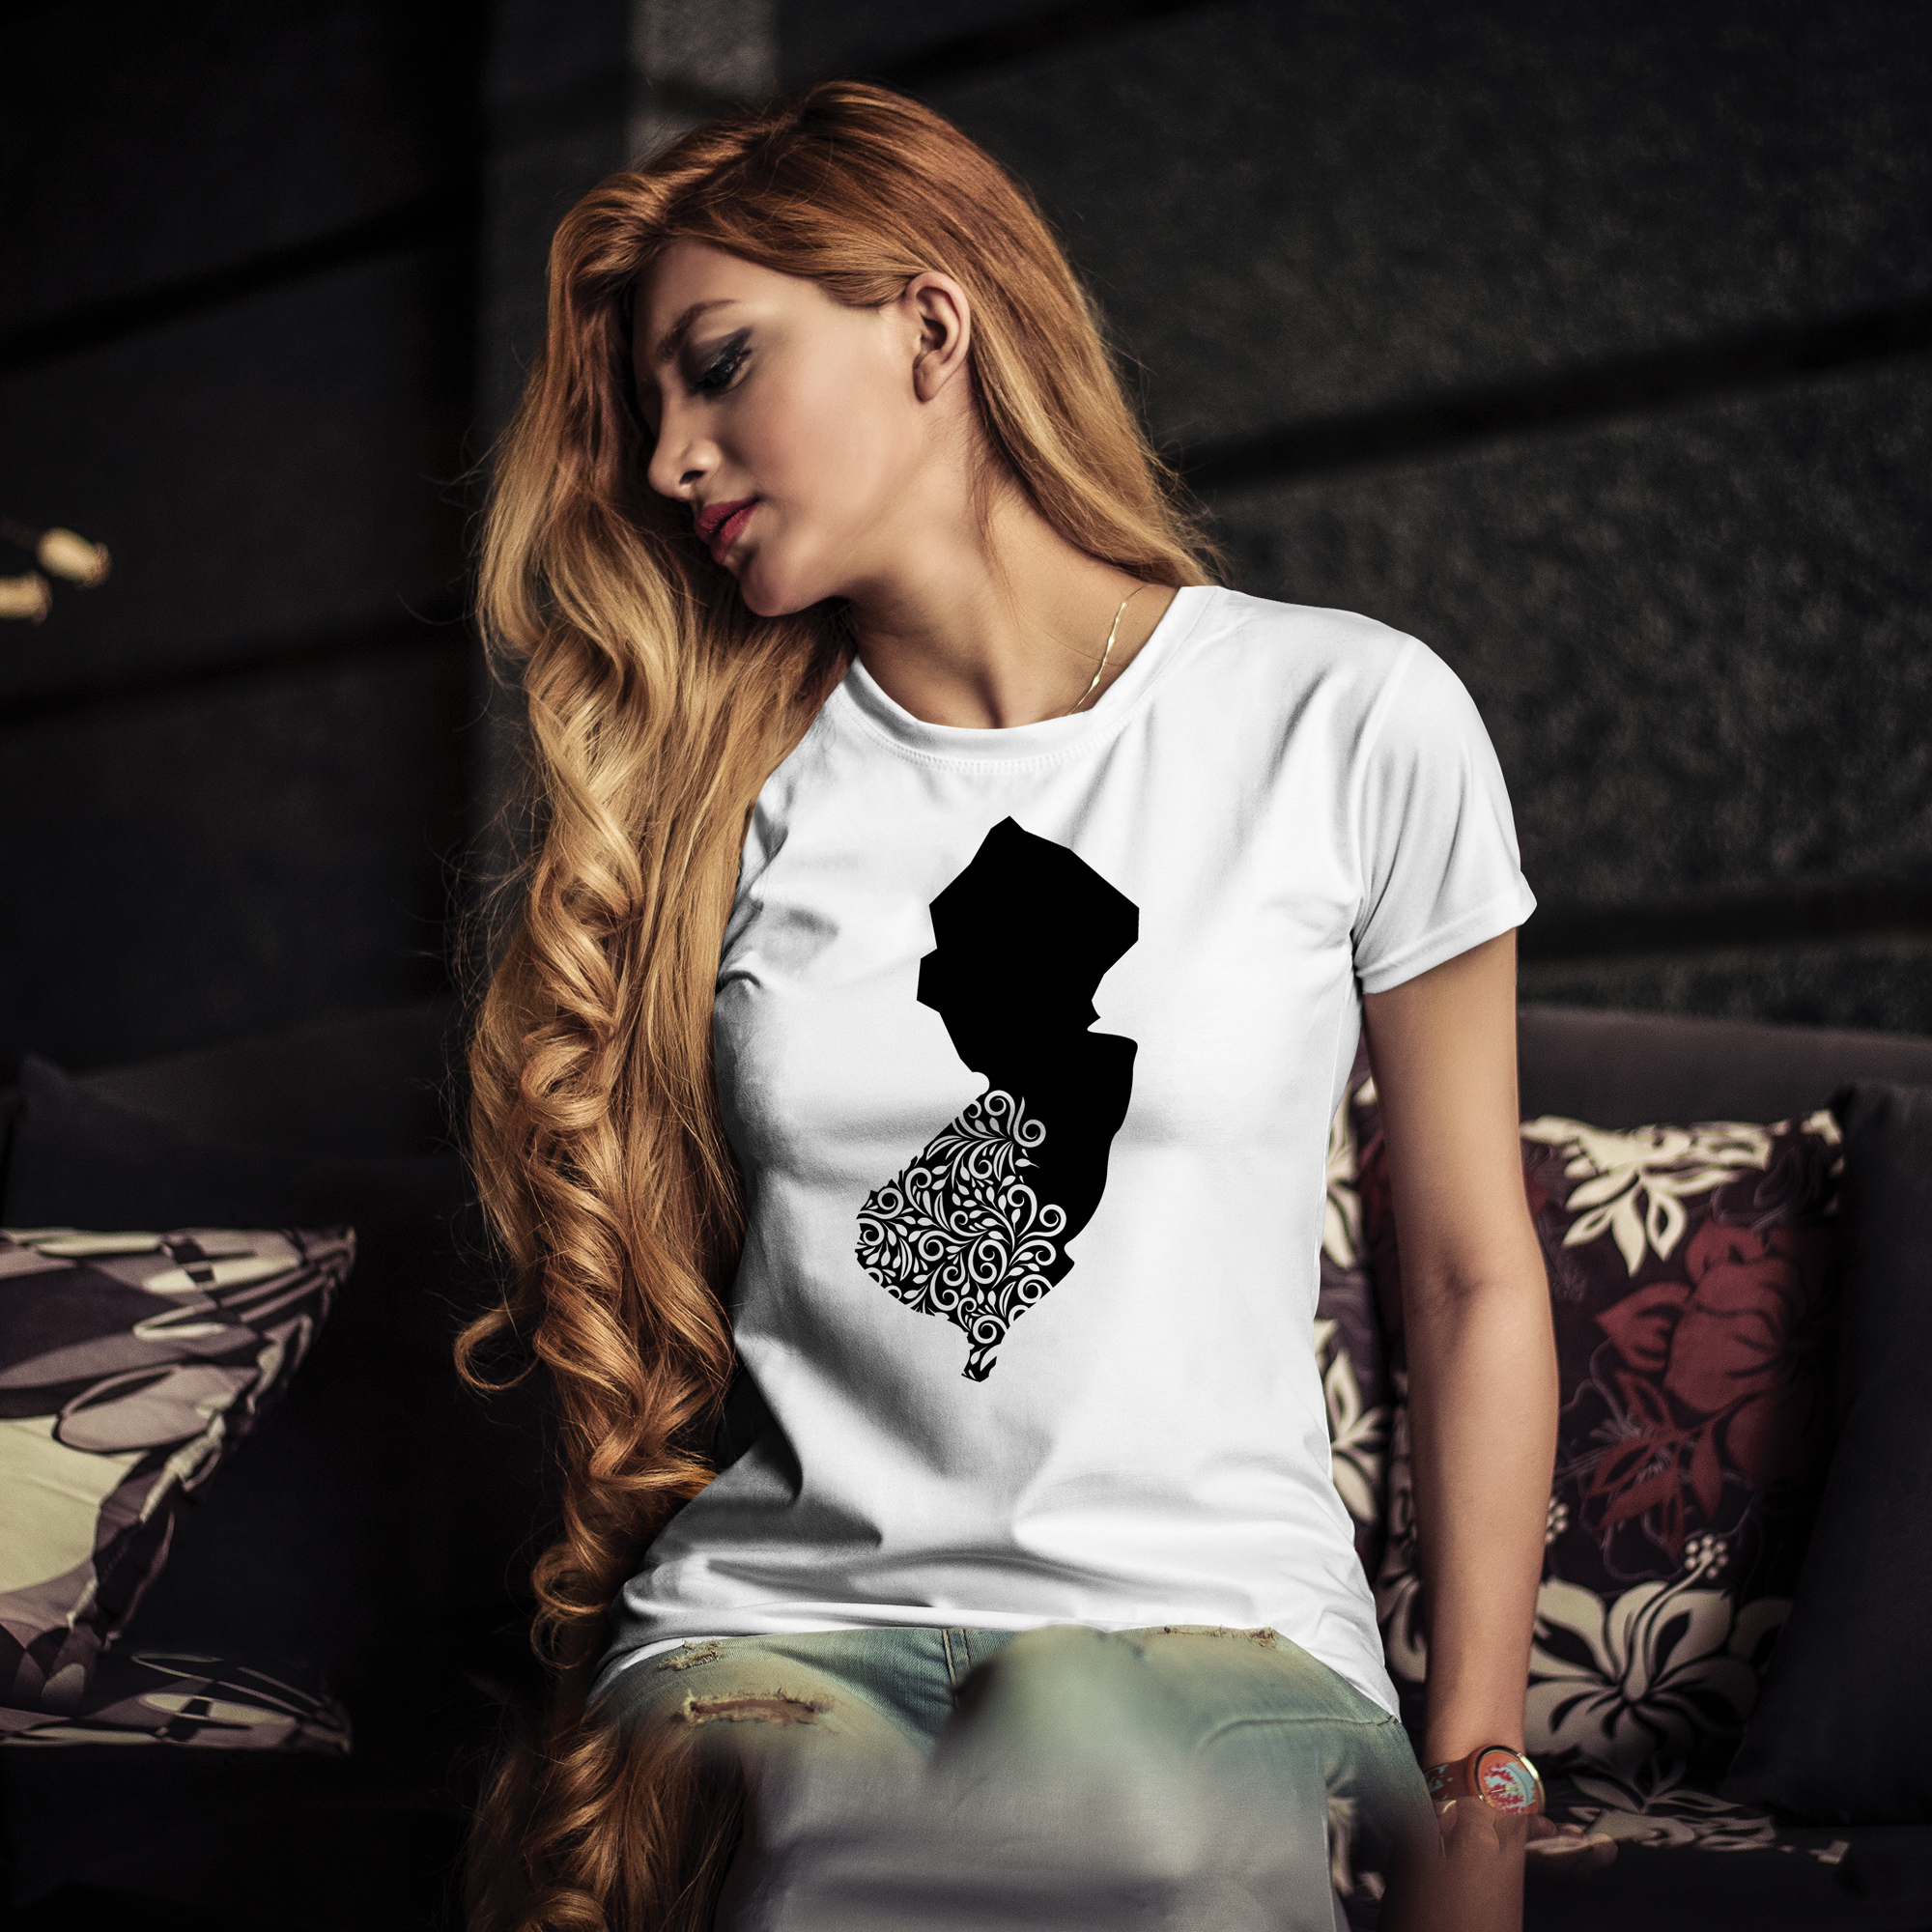 White t-shirt with black illustration of New Jersey state.